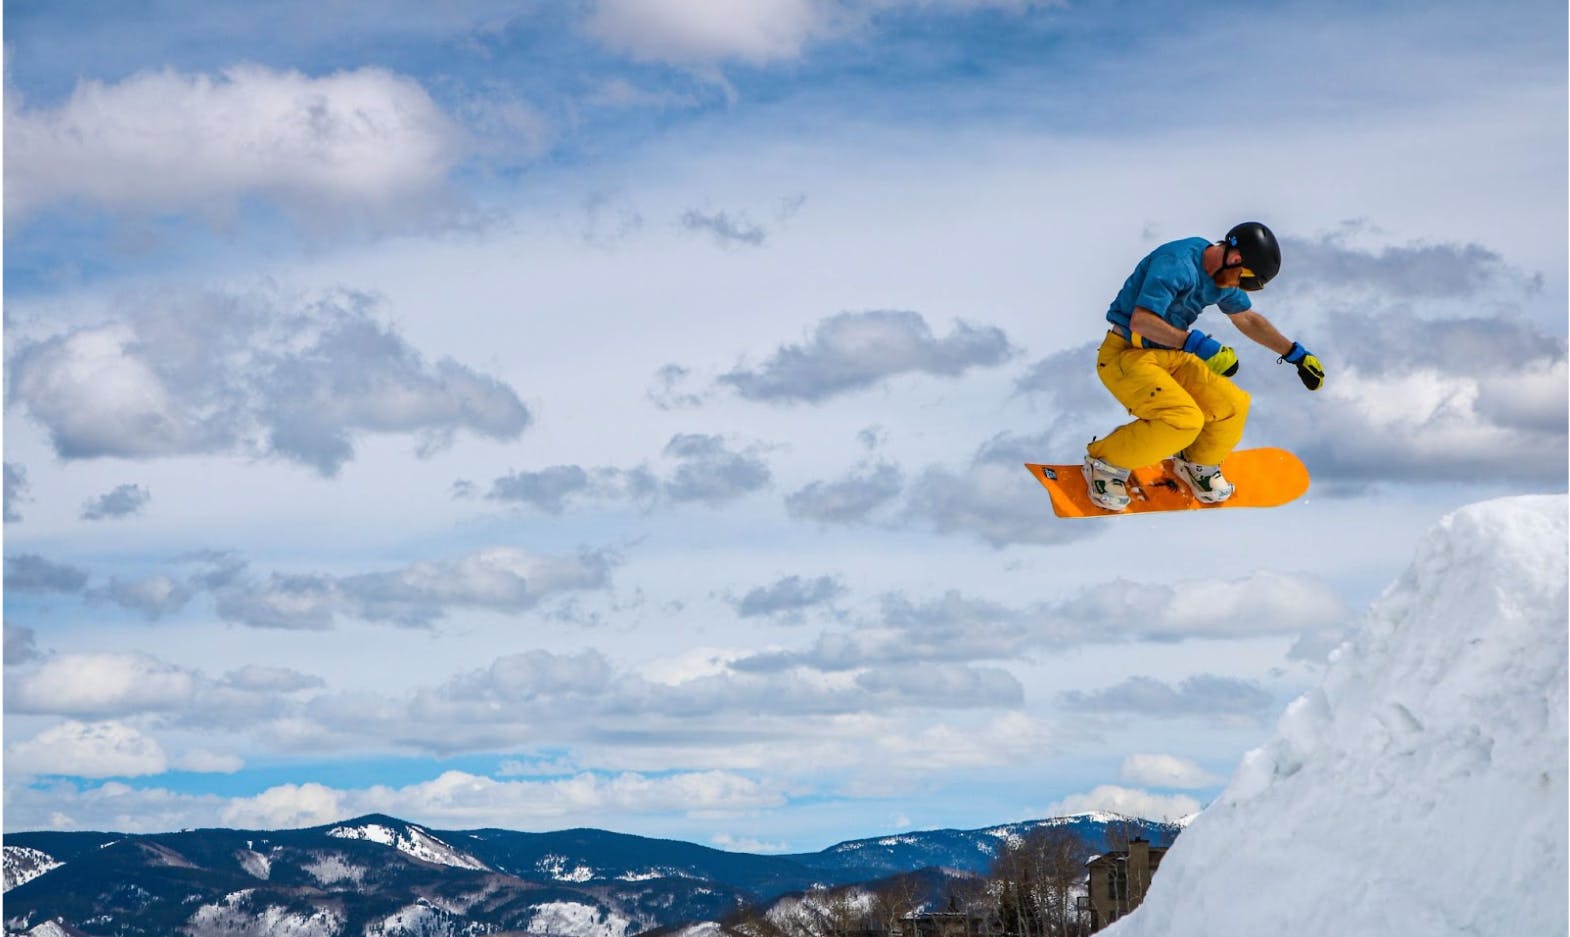 A snowboarder goes off a jump.